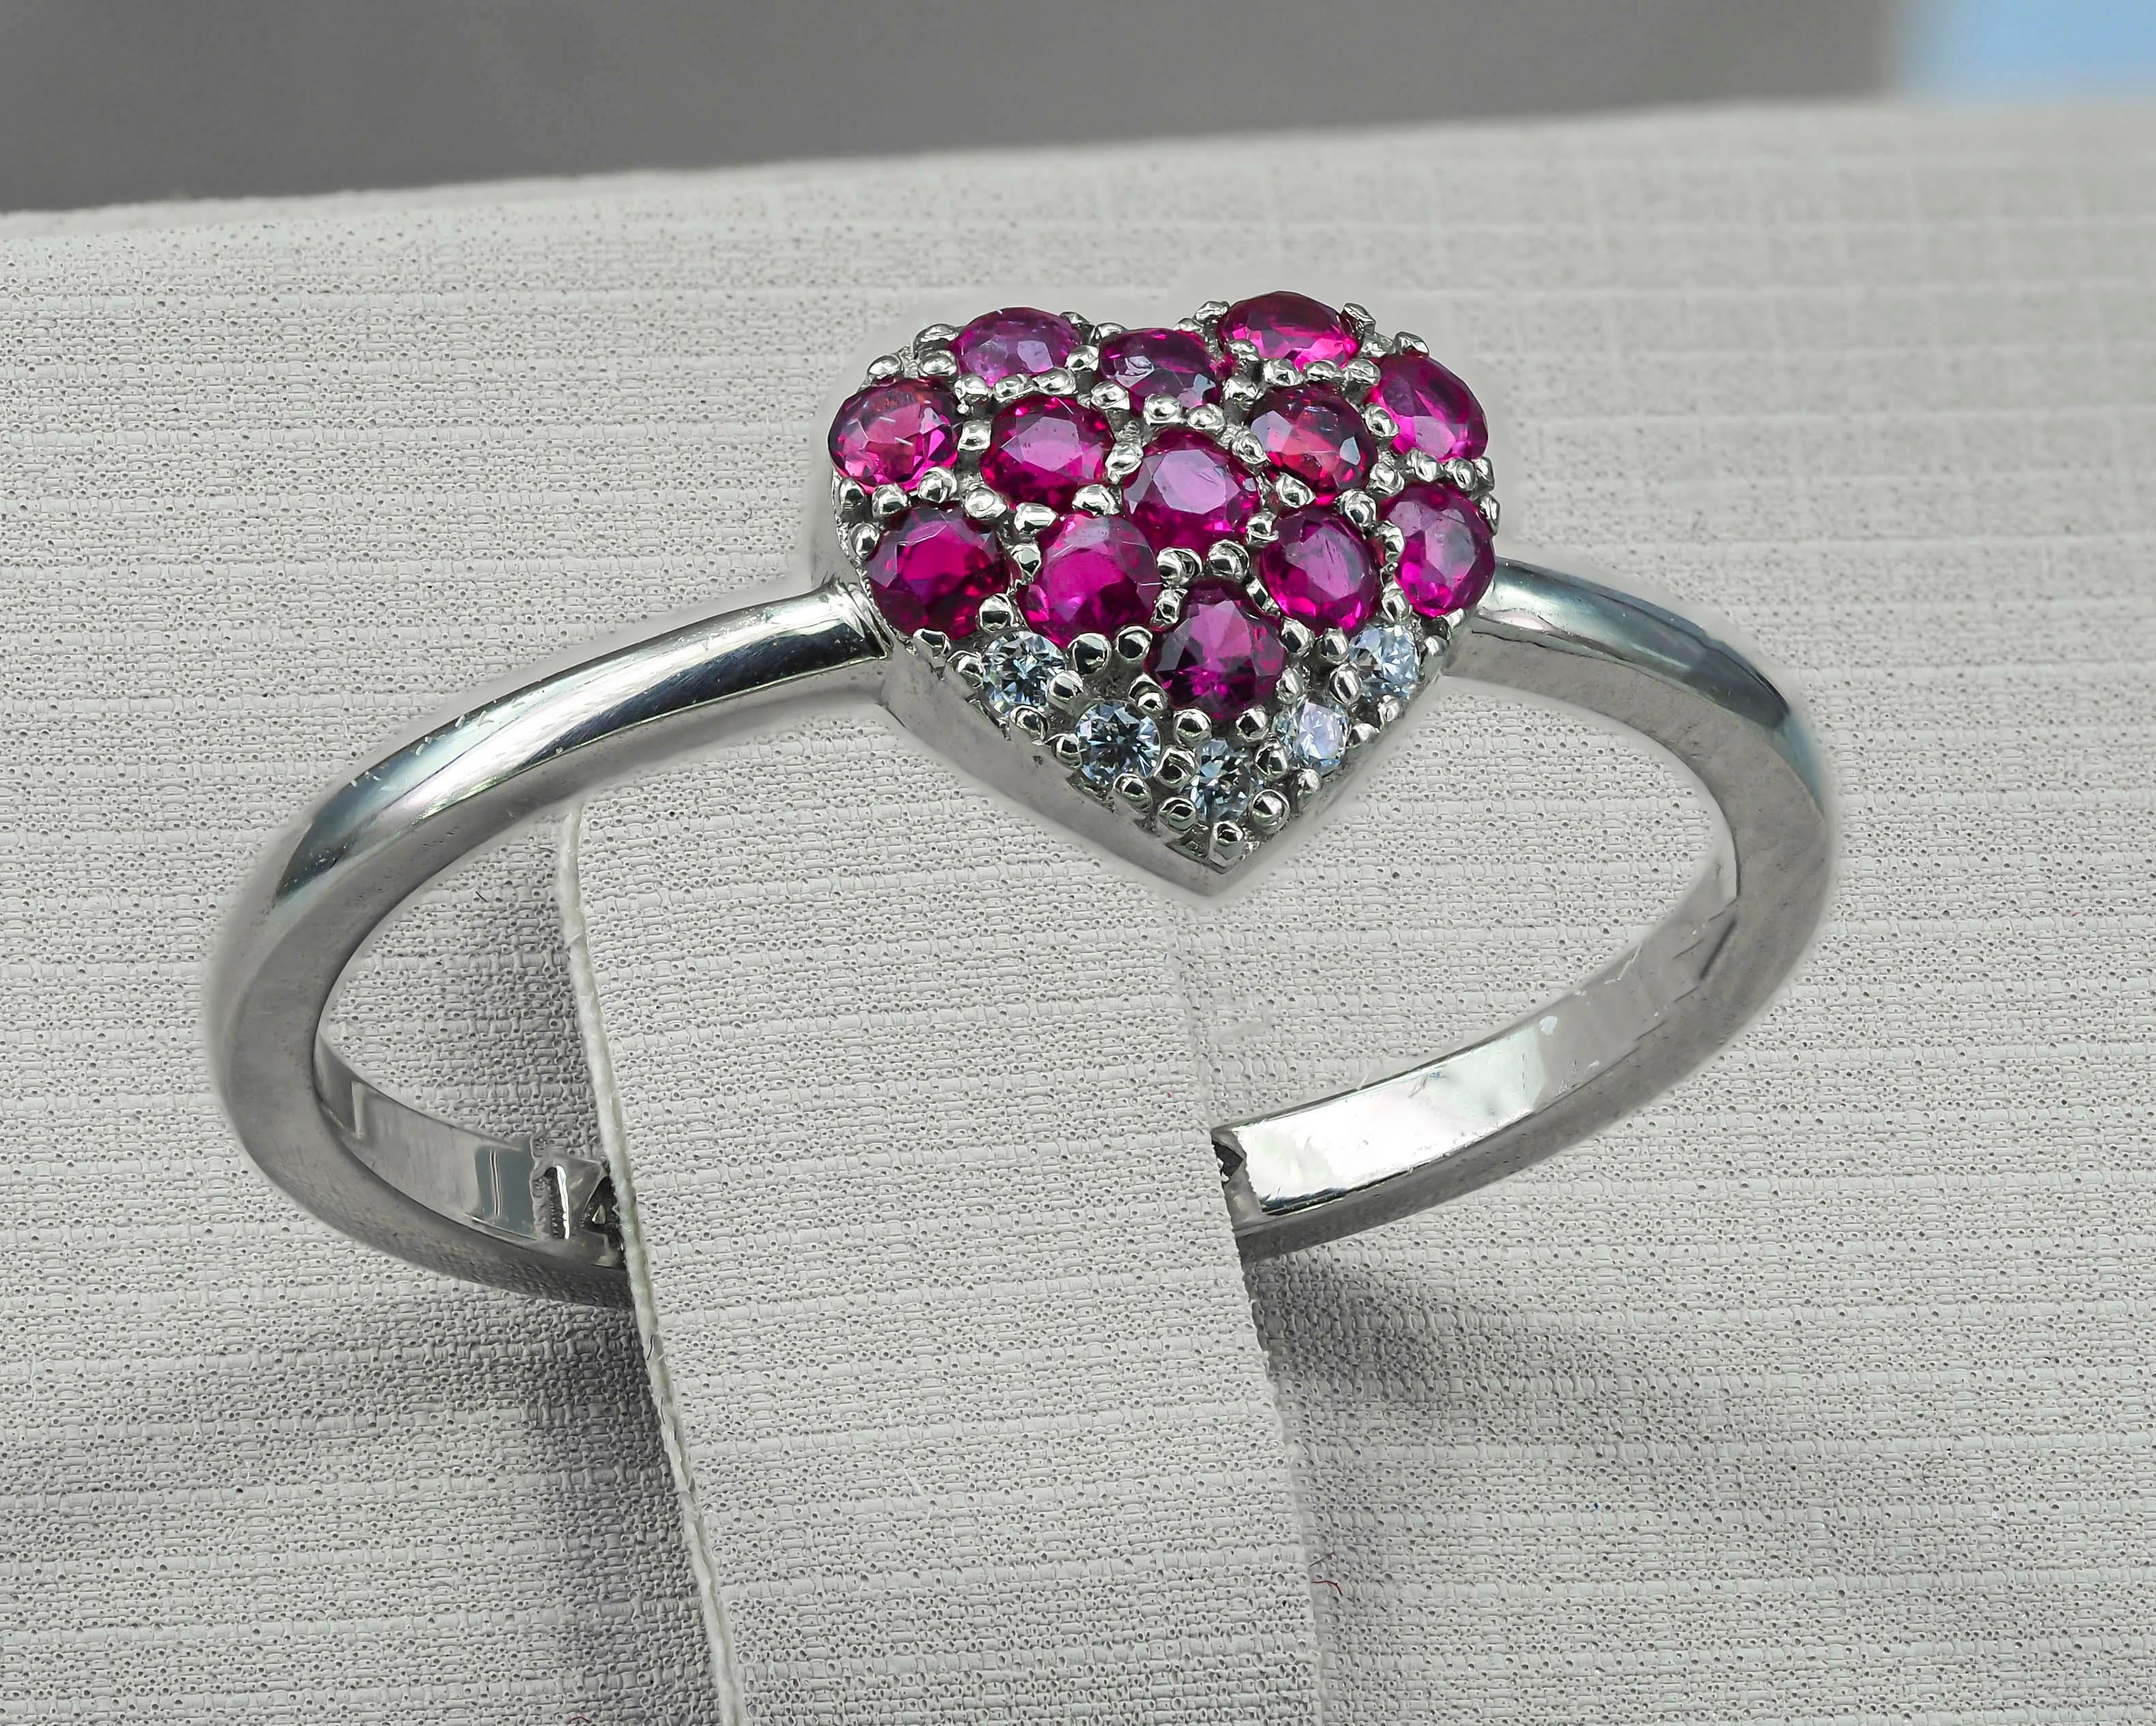 For Sale:  14 karat Gold Ring with Diamonds and Rubies. Heart Gold Ring. Love ring. 7